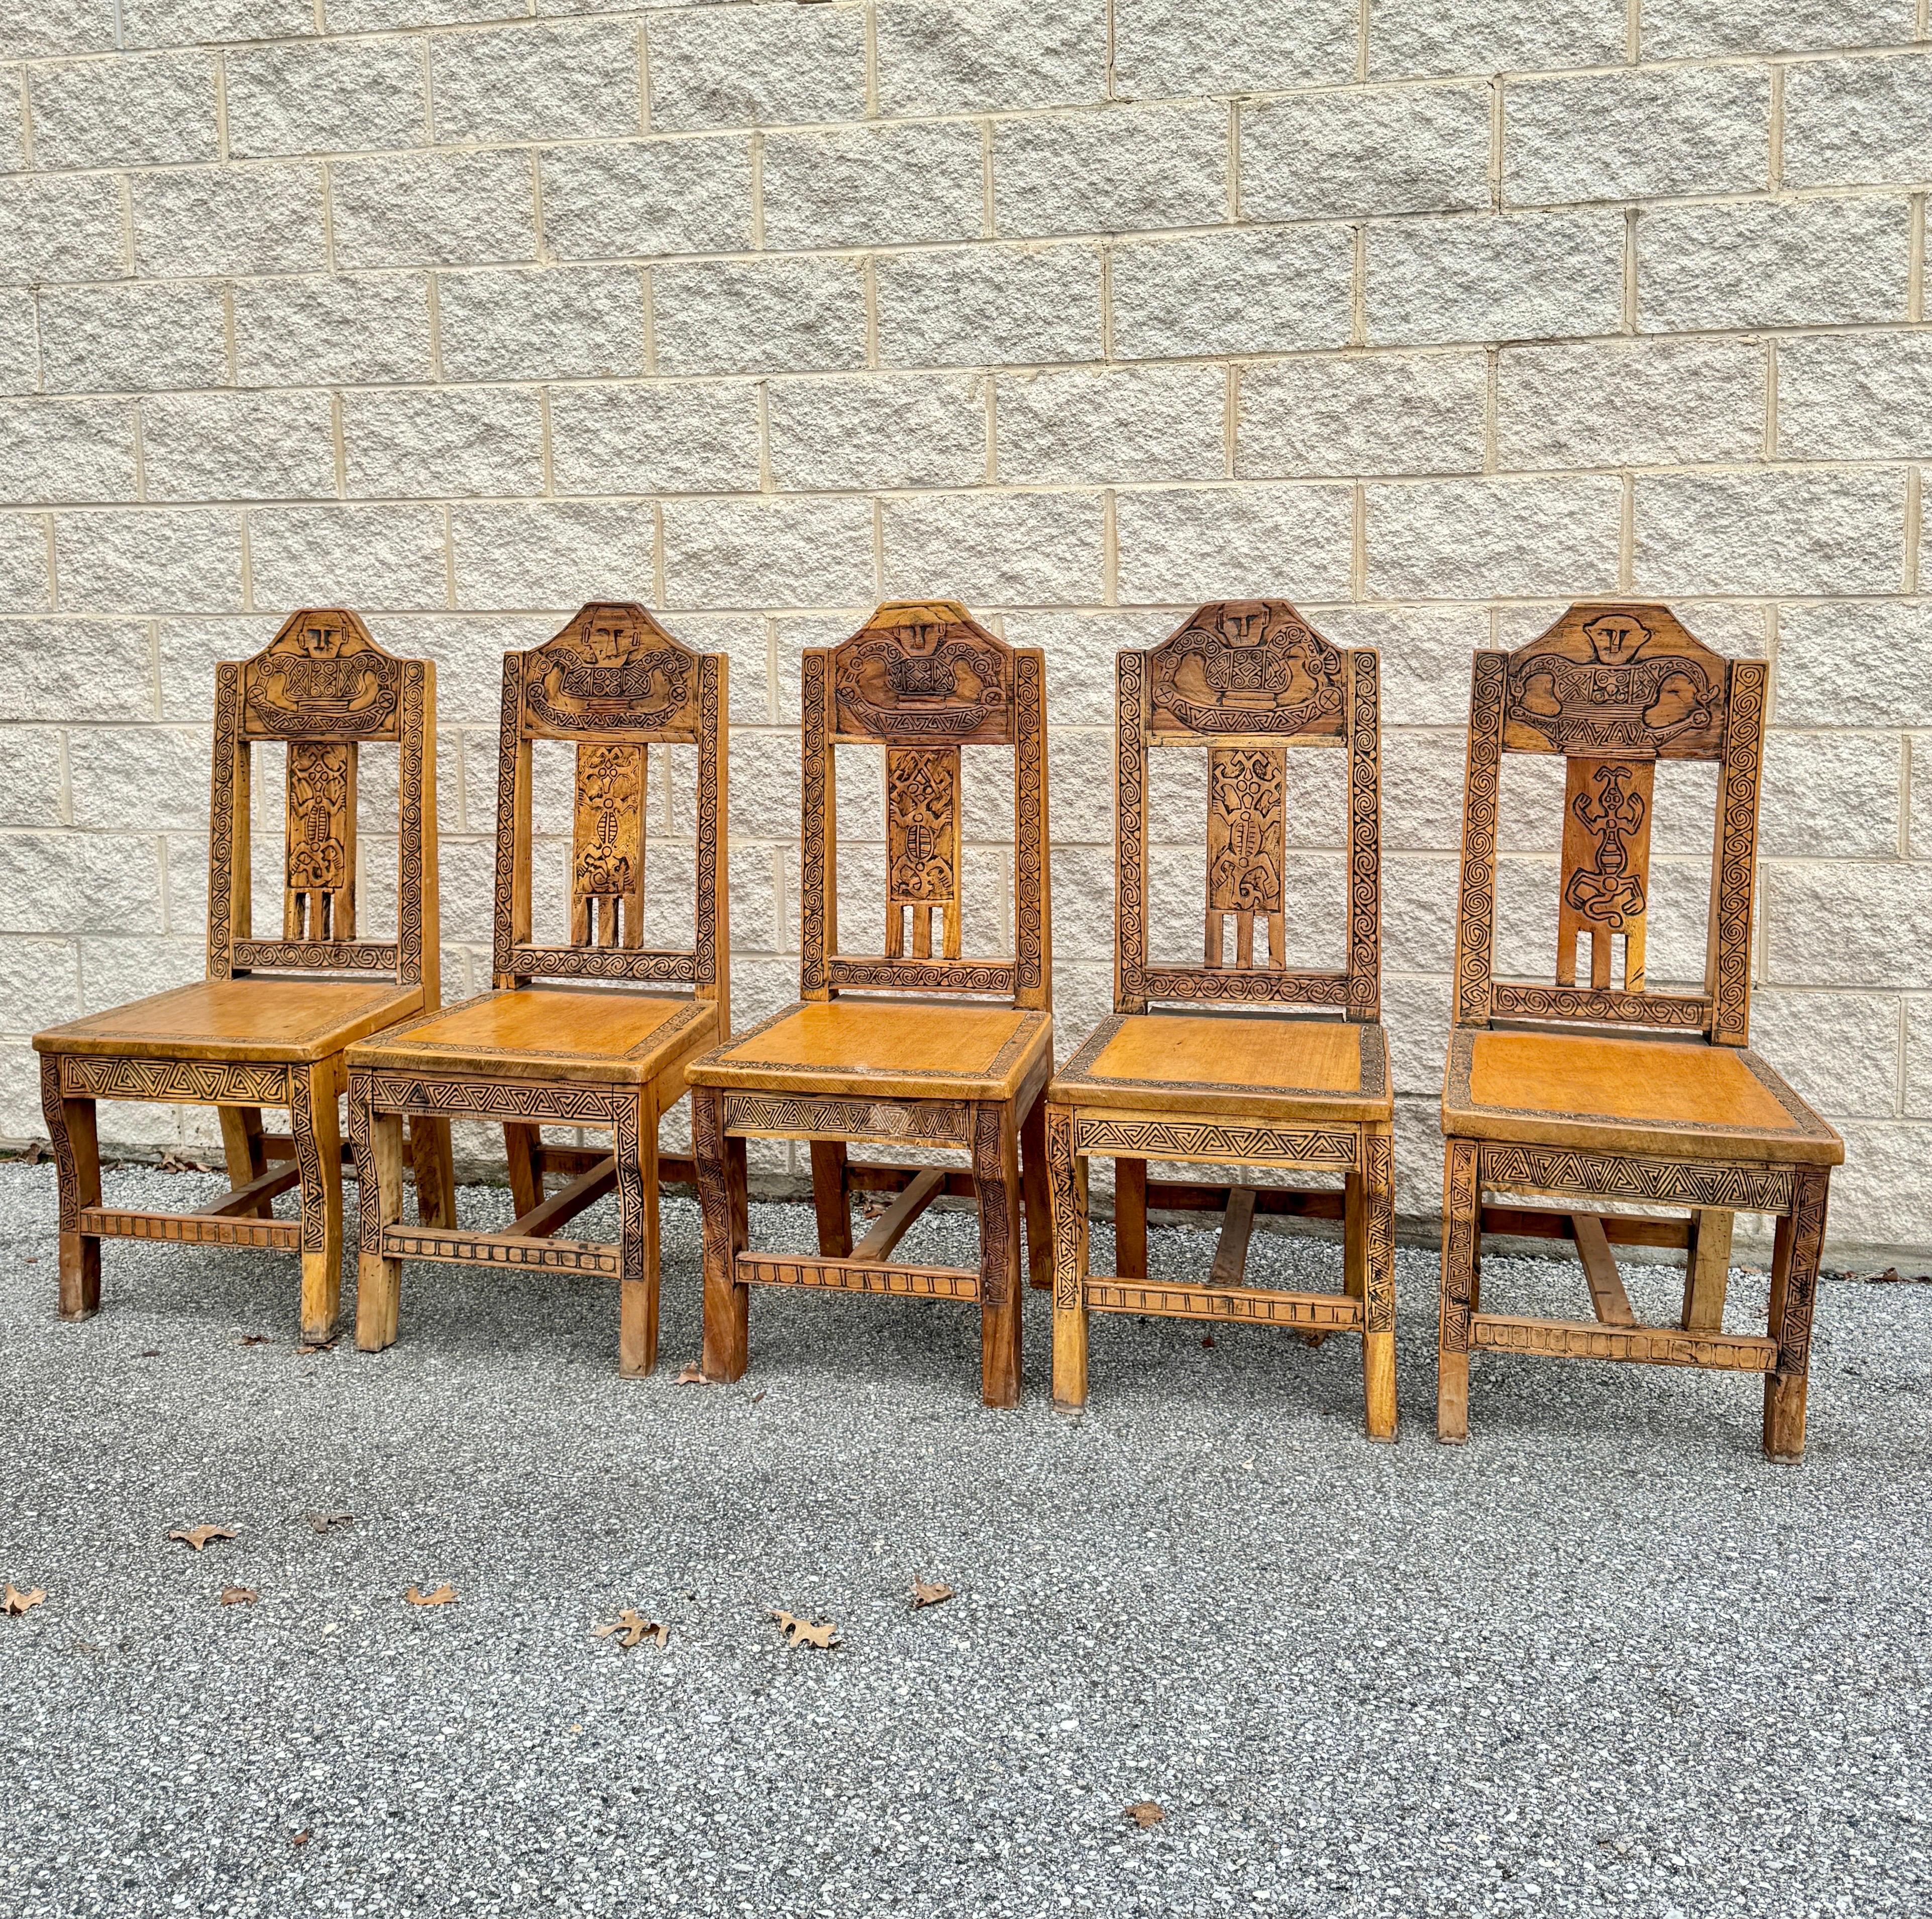 A set of 4 charming dining chairs made of rustic oak with rush seats. These chairs feature ladder-style backs. They are meticulously handcrafted, showcasing a simple yet elegant style with a touch of modern organic aesthetics. 